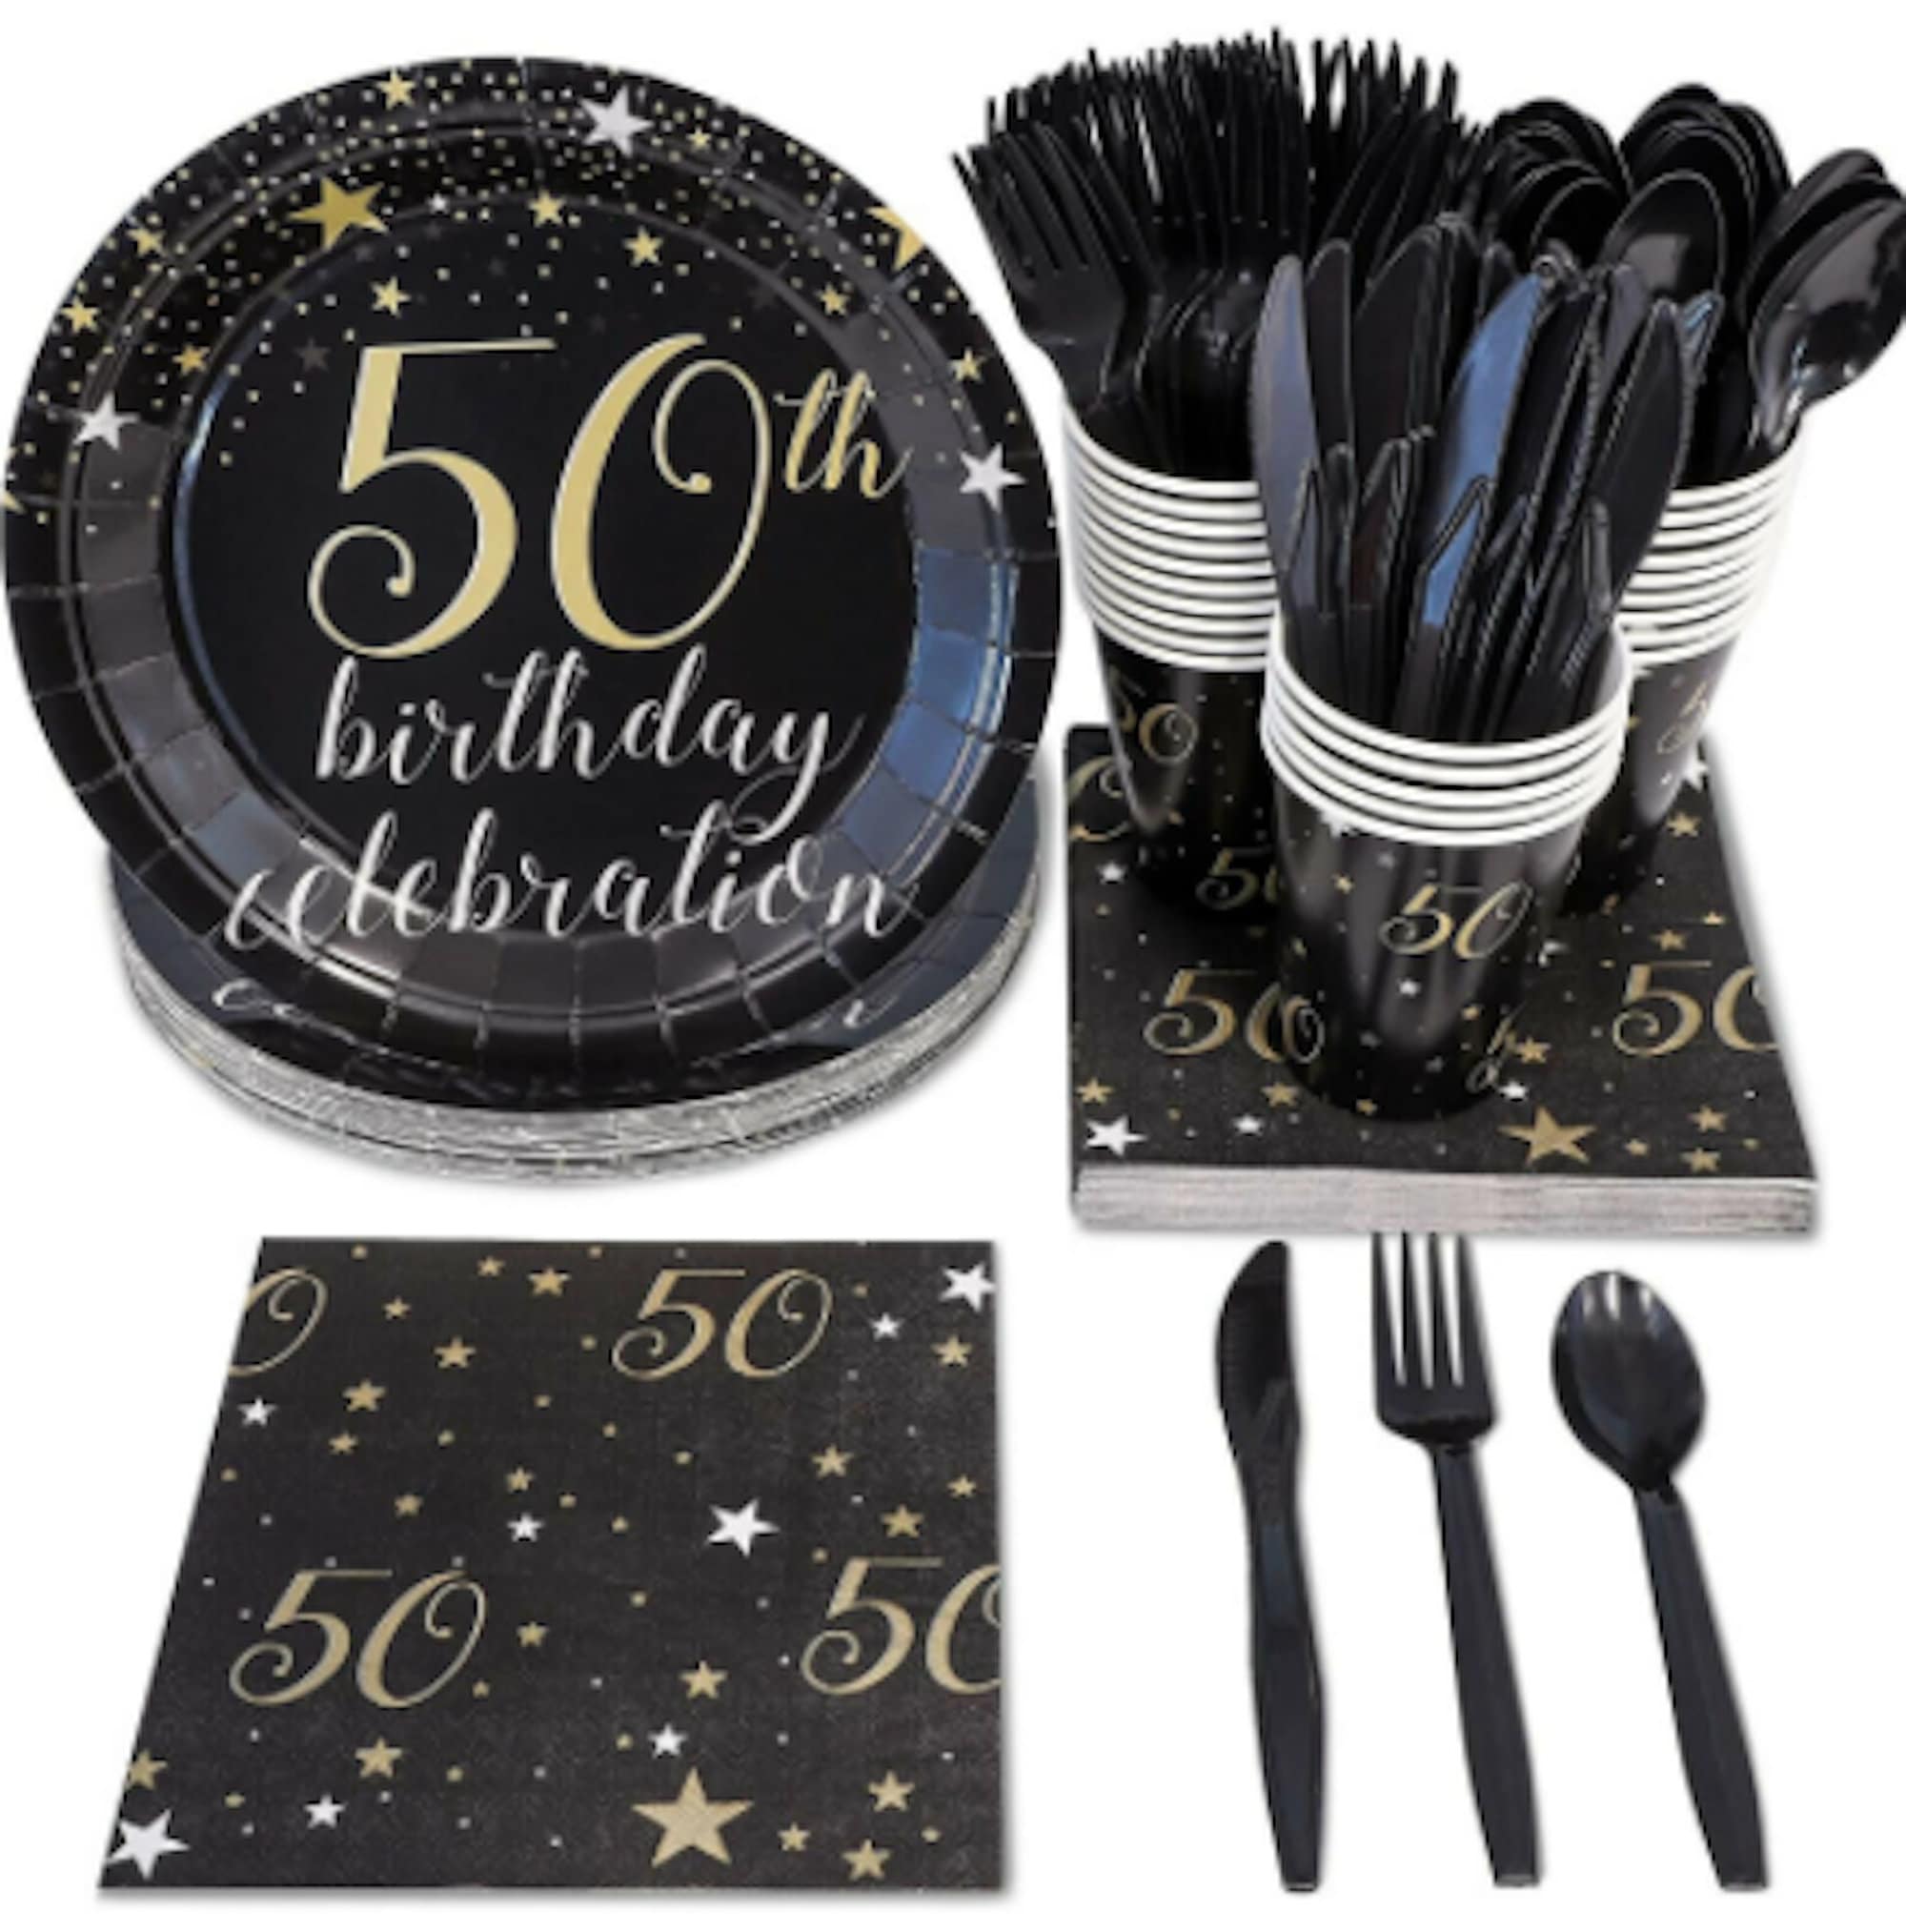 9 Dinner Paper Plates 7 Dessert Paper Plates 9 oz Cups 3 Ply Napkins 50th Birthday Party Supplies and Decorations for Men and Women 50th Birthday Plates and Napkins and Cups Sets Serves 30 